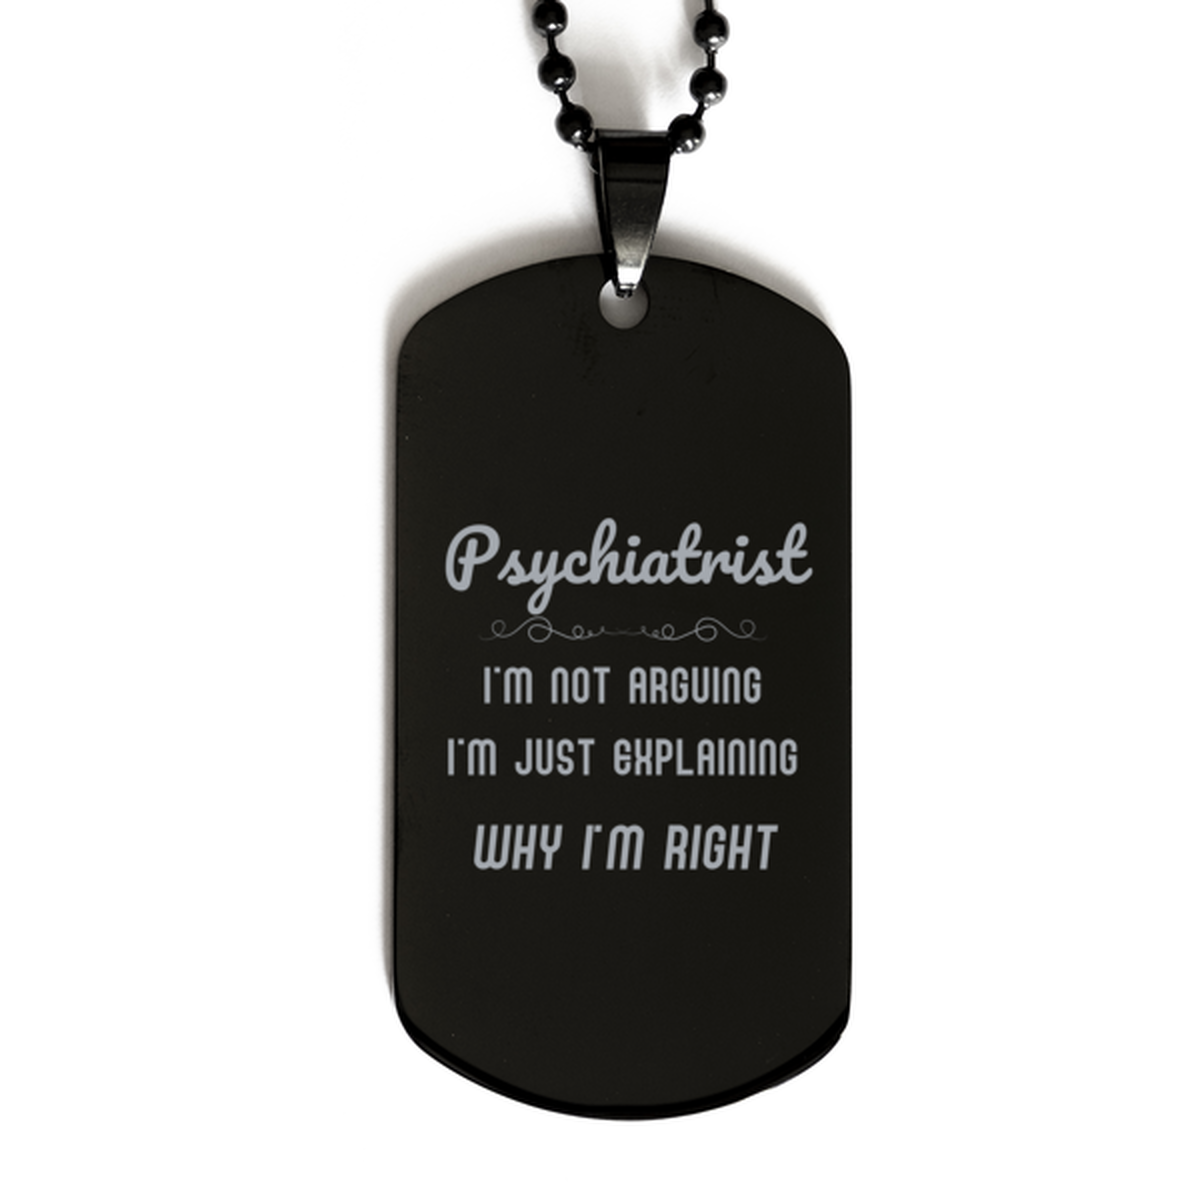 Psychiatrist I'm not Arguing. I'm Just Explaining Why I'm RIGHT Black Dog Tag, Funny Saying Quote Psychiatrist Gifts For Psychiatrist Graduation Birthday Christmas Gifts for Men Women Coworker